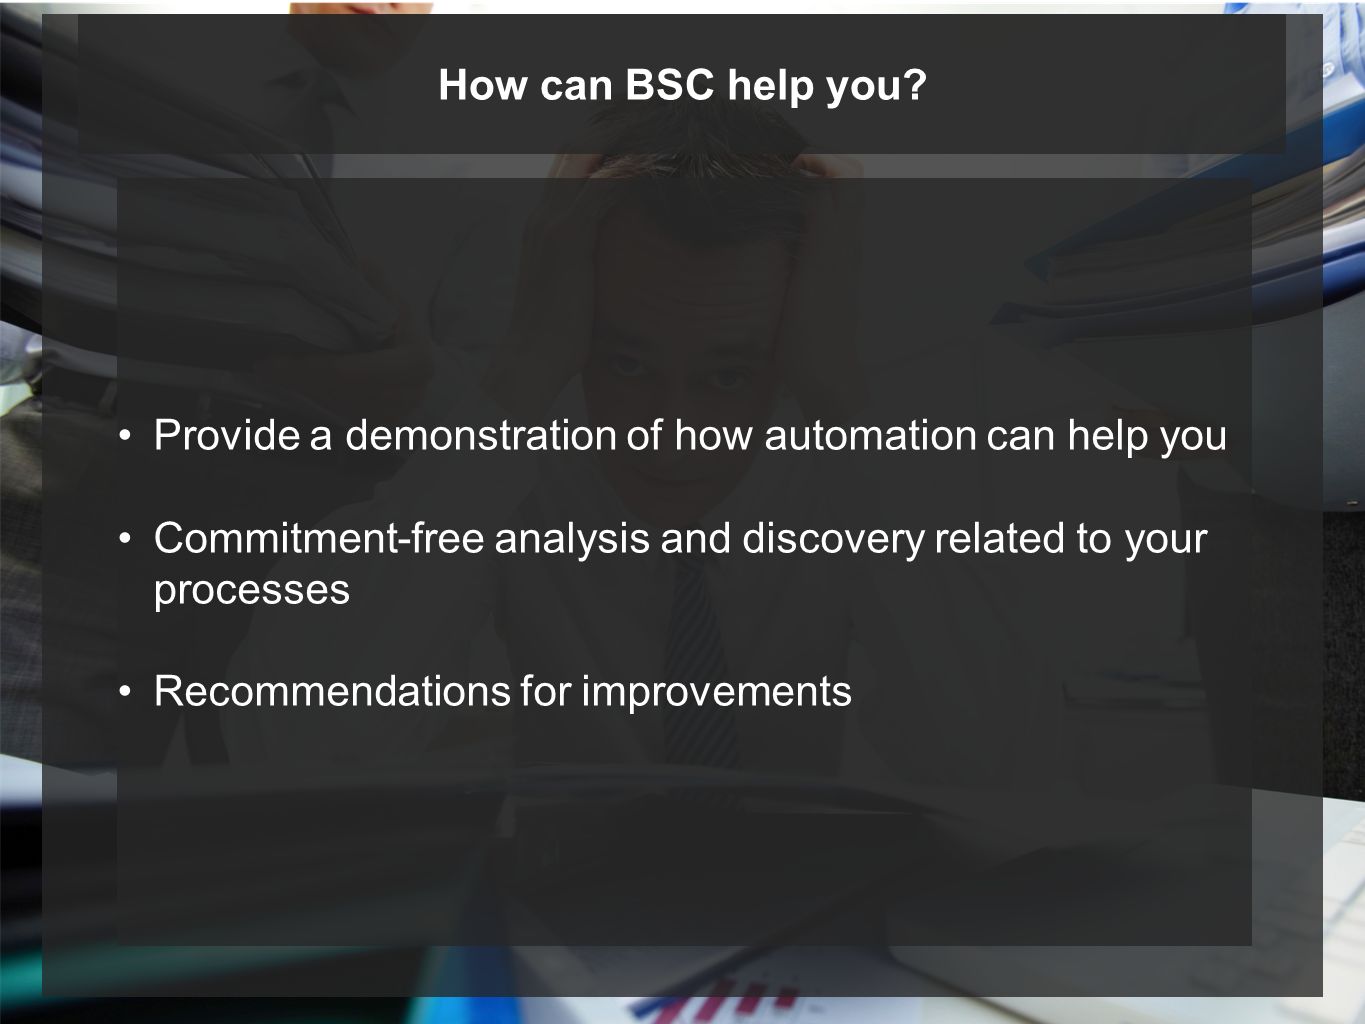 Provide a demonstration of how automation can help you Commitment-free analysis and discovery related to your processes Recommendations for improvements How can BSC help you